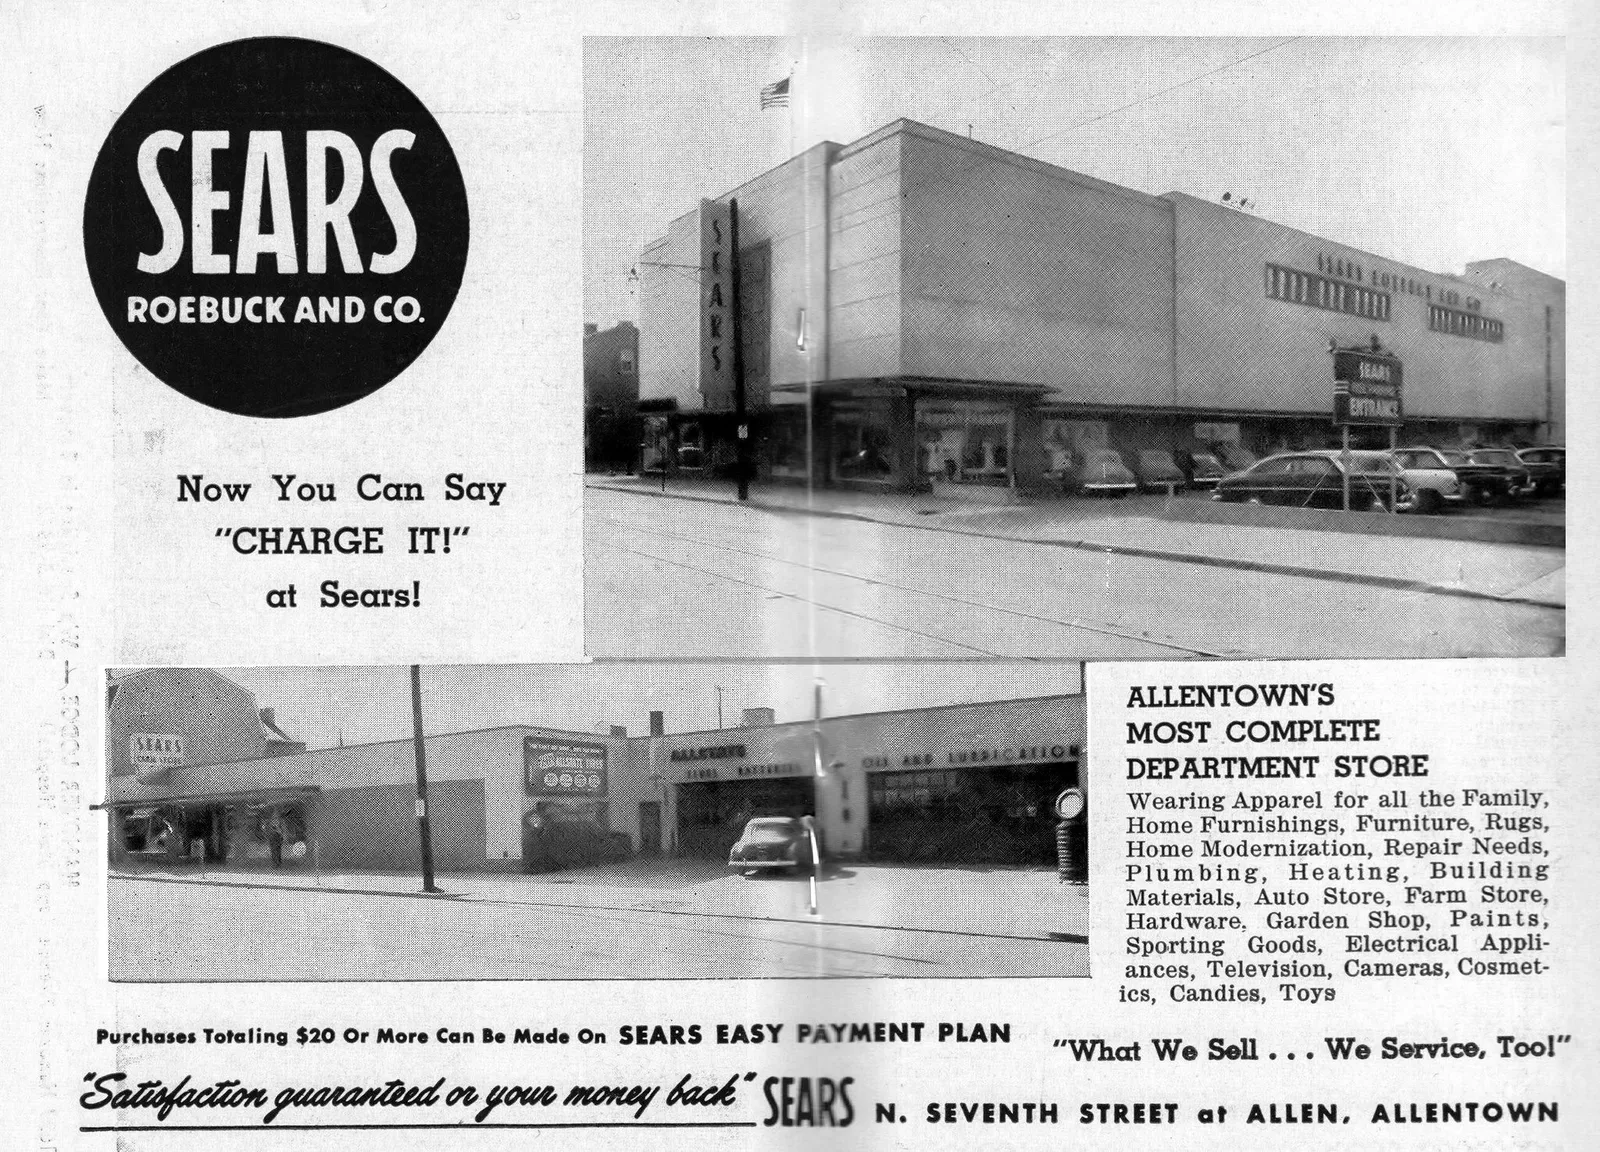 Why we loved Sears: The Sears catalog